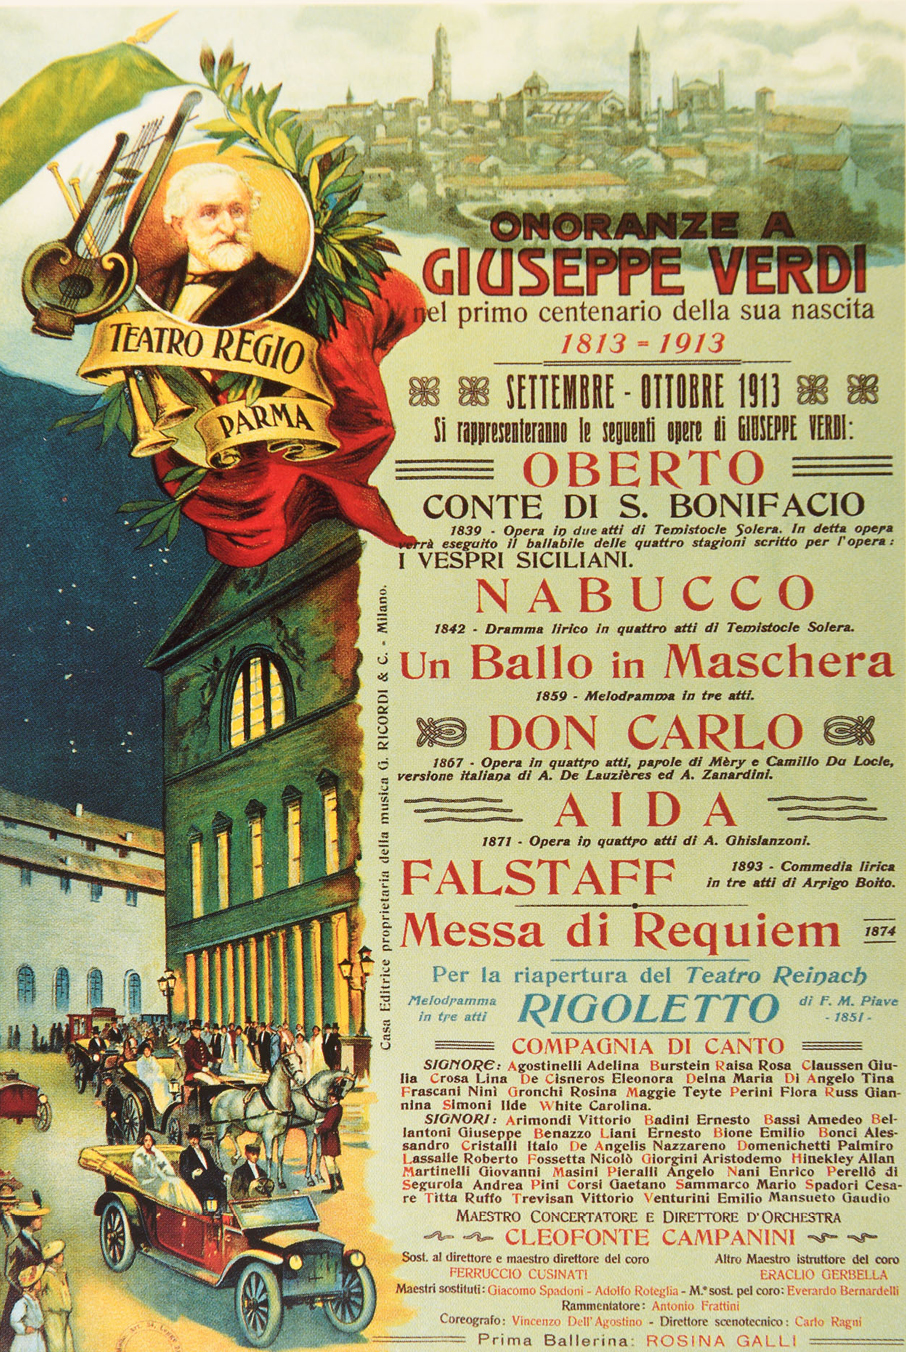 POSTER OF THE CELEBRATIONS FOR THE VERDIAN CENTARY OF 1913